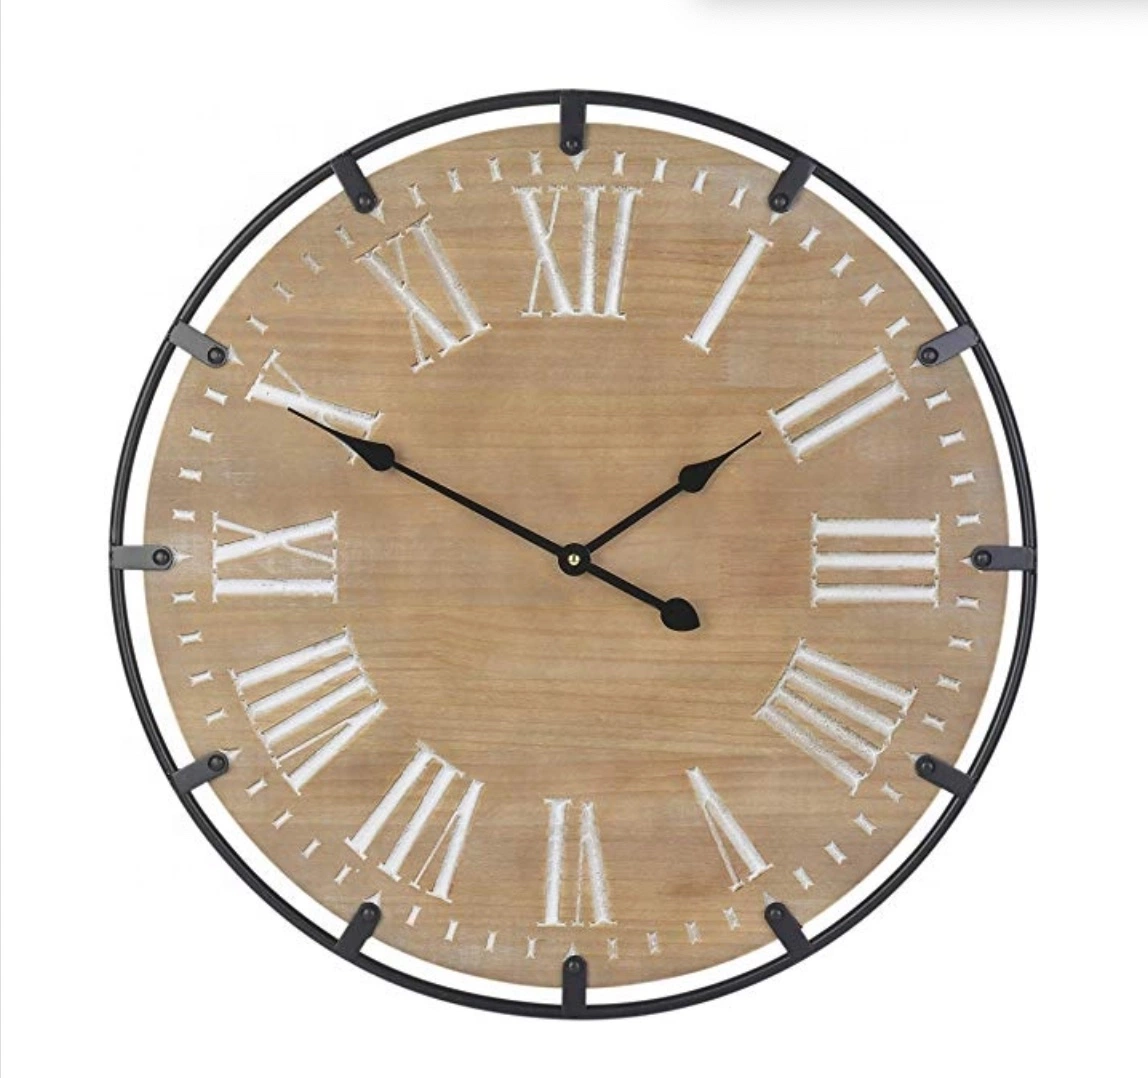 Oversized Rustic Metal Solid Wood Silent Wall Clock Indoor Decor Large